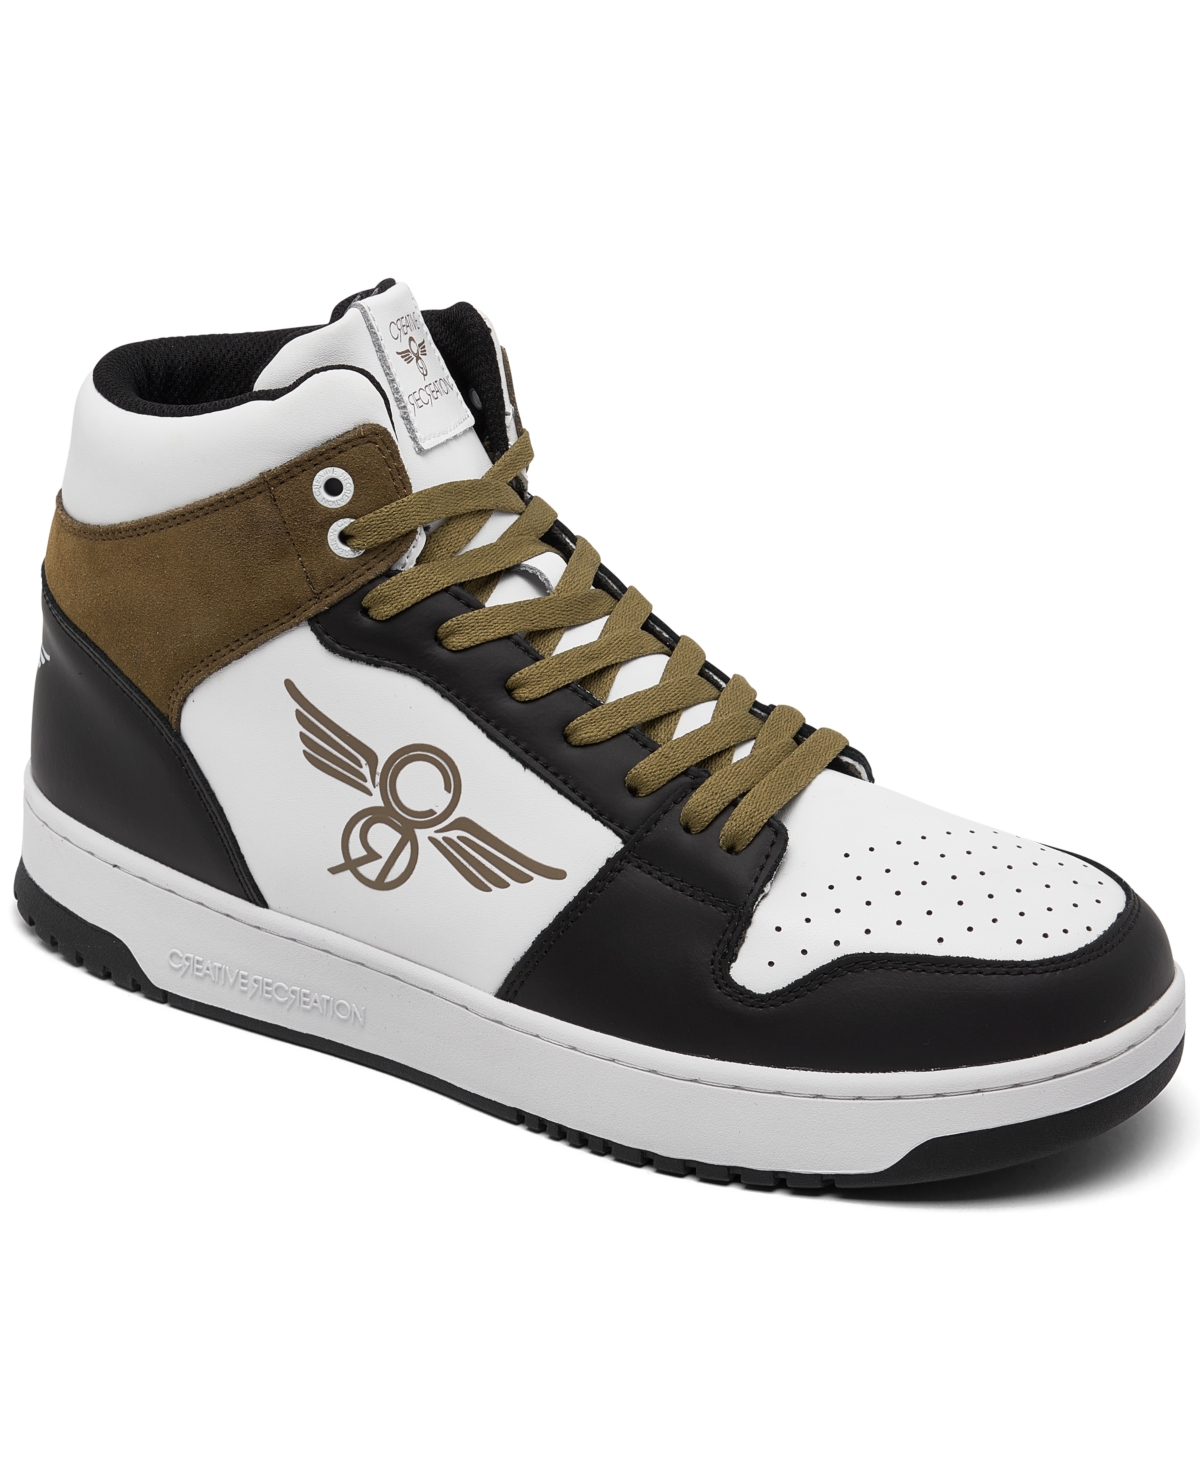 Men's Dion High Casual Sneakers from Finish Line - Black, Brown, White